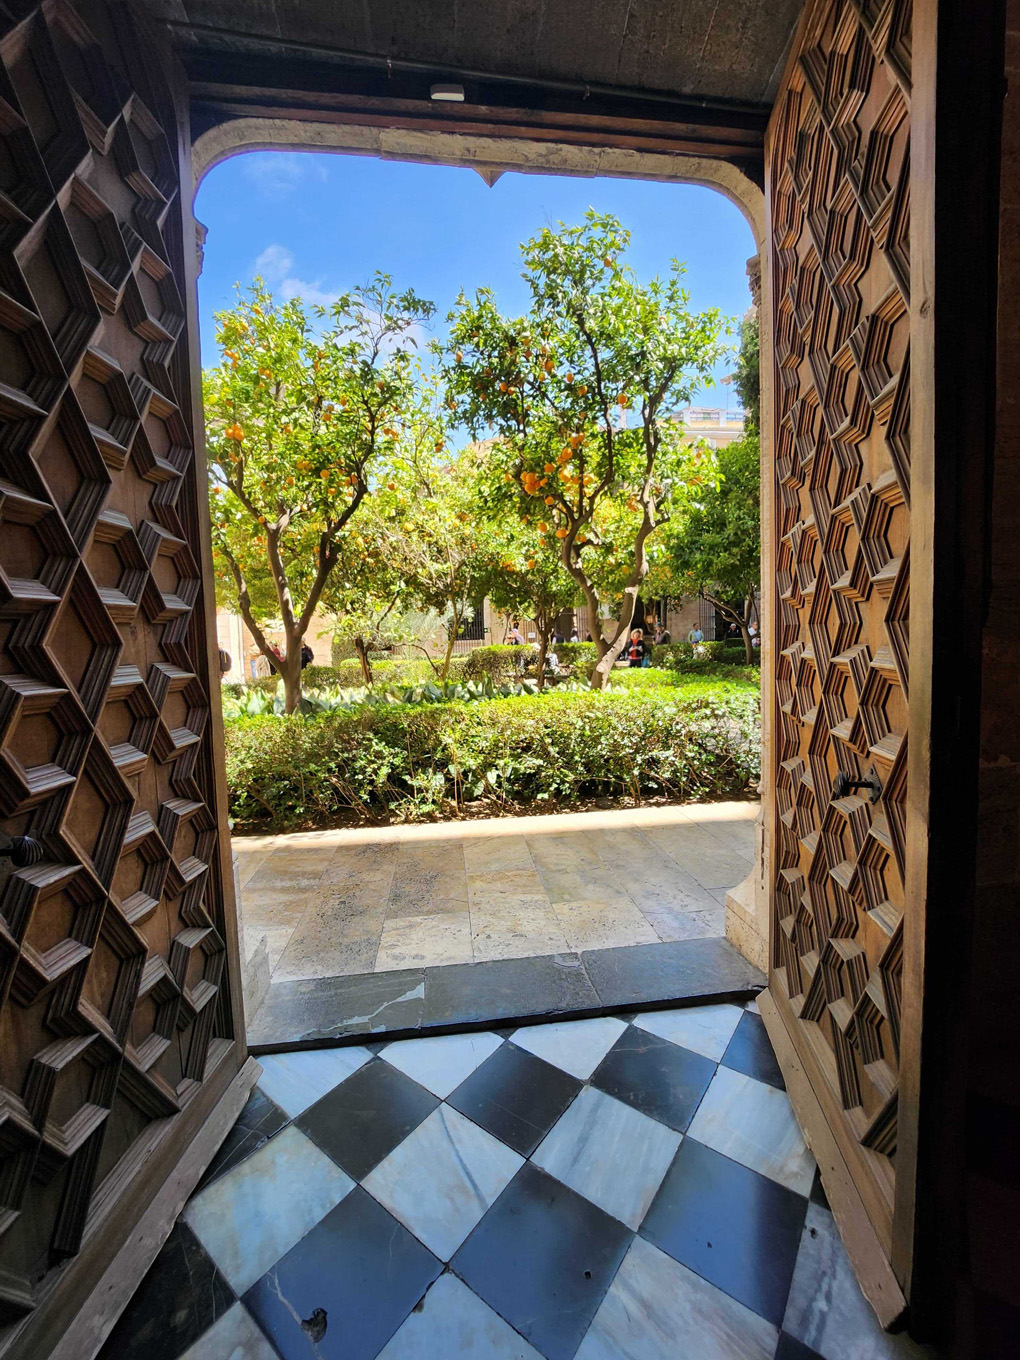 Two large and ornate doors are open, leading to a courtyard full of orange trees.